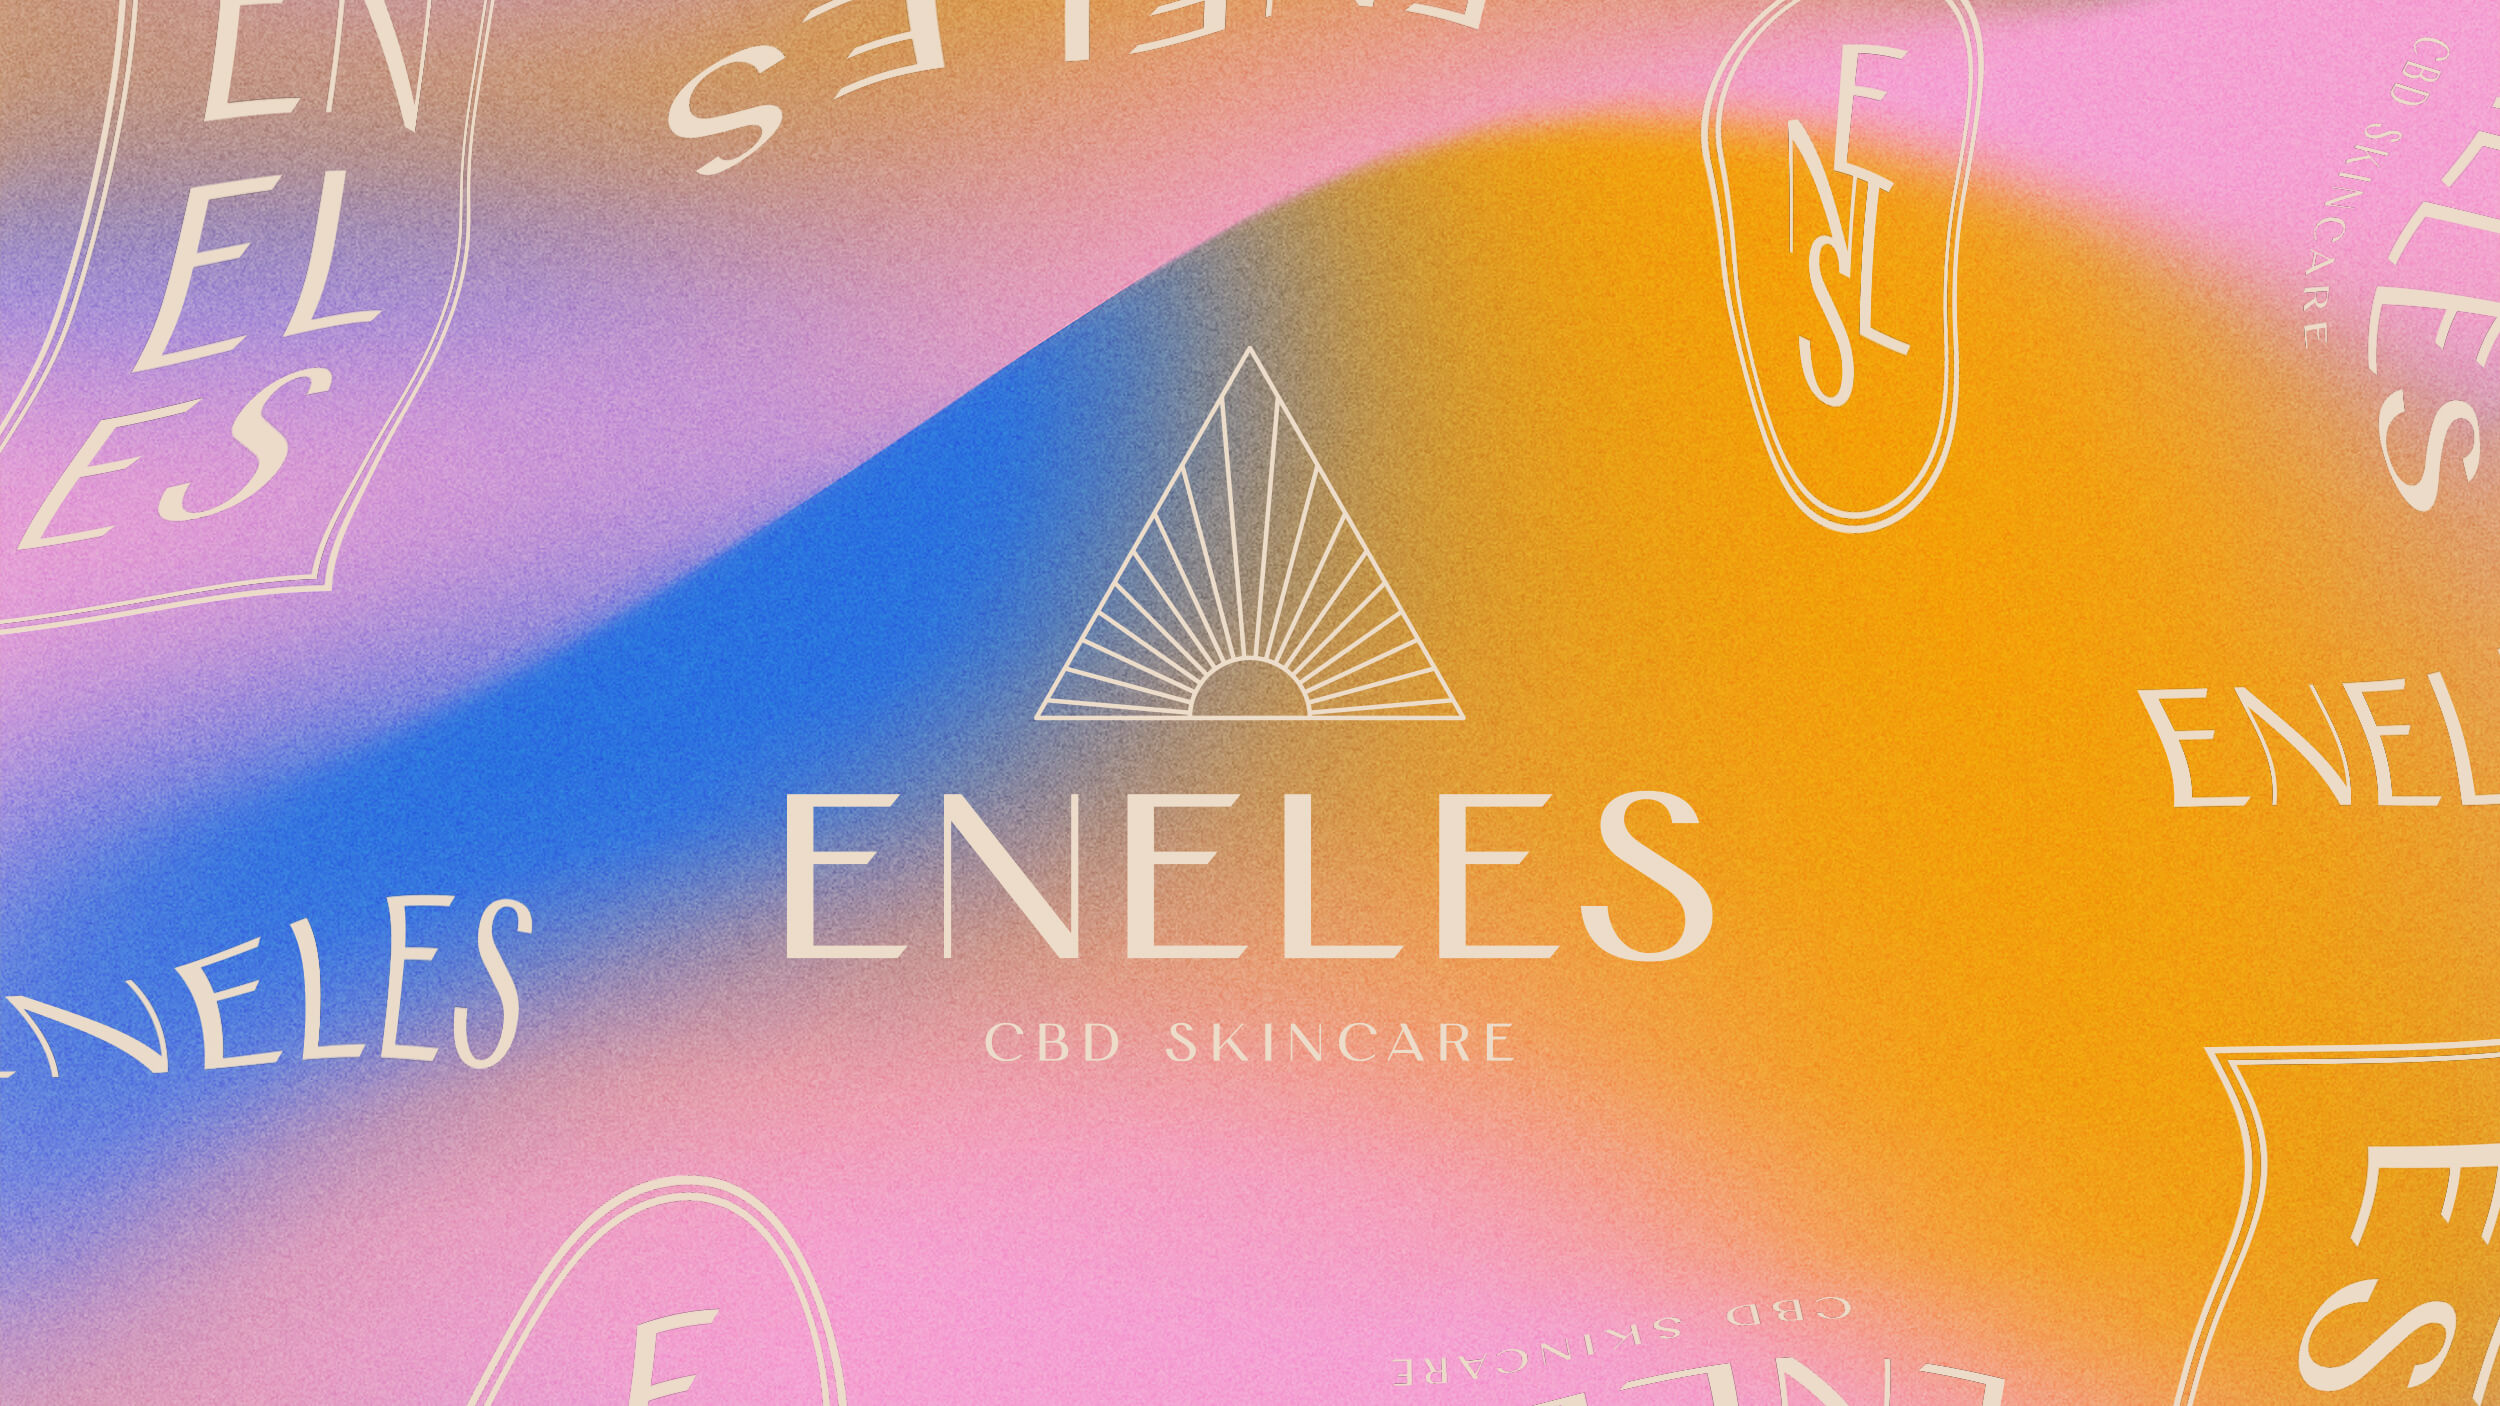 CBD Skincare brand,Eneles, logo with the additional marks warped around it on a gradient background